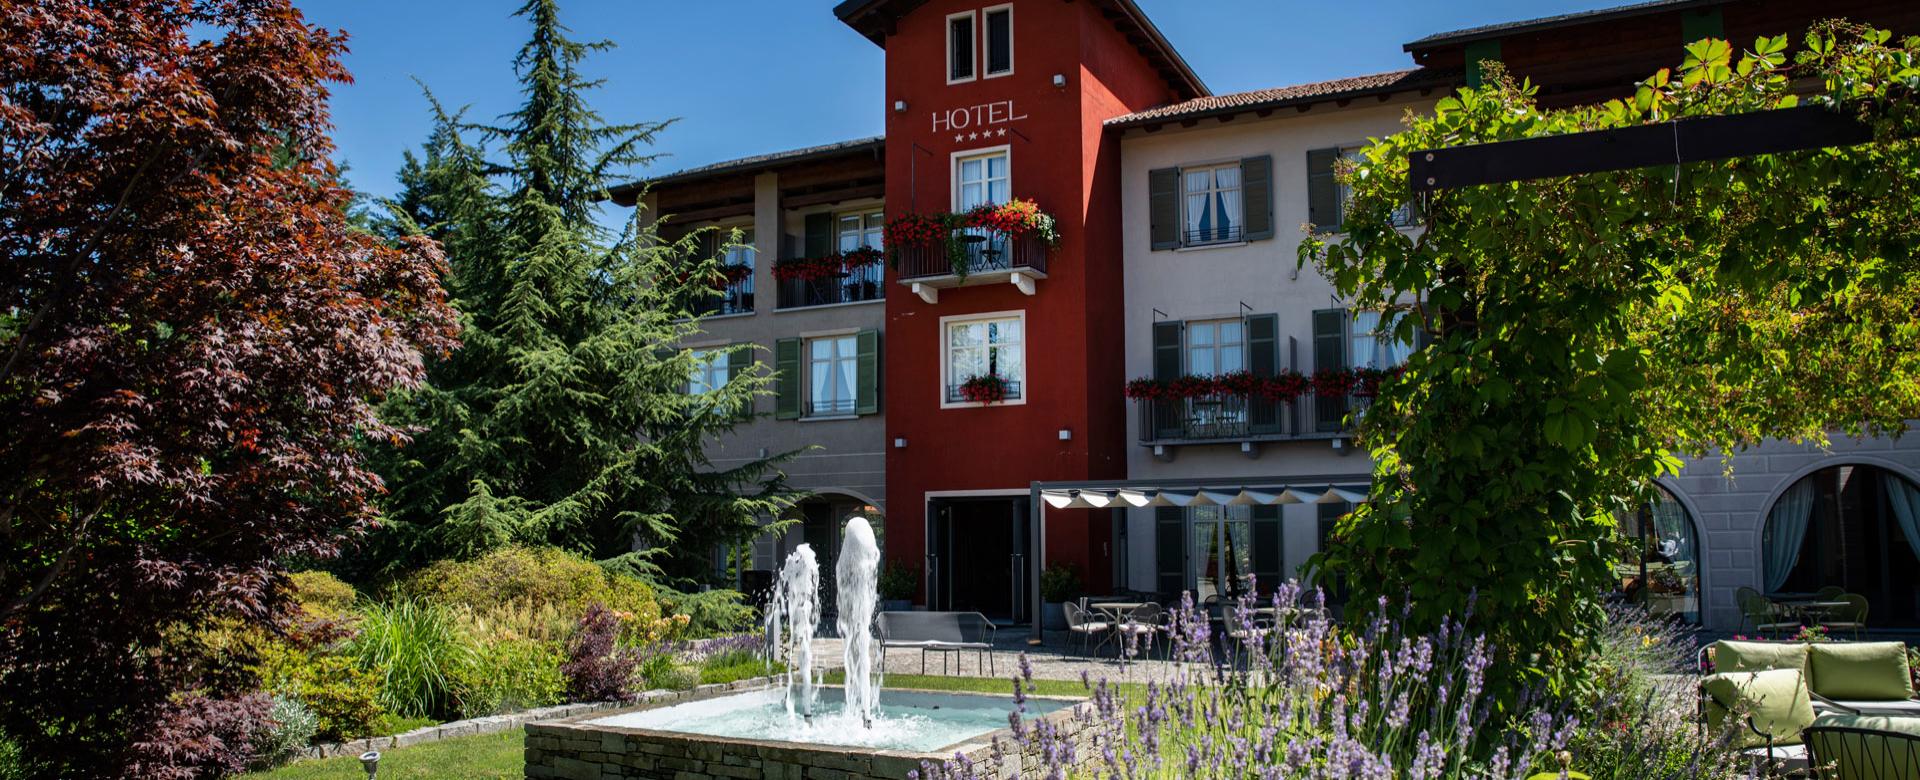 cortesehotel en disabled-people-lake-maggiore 012